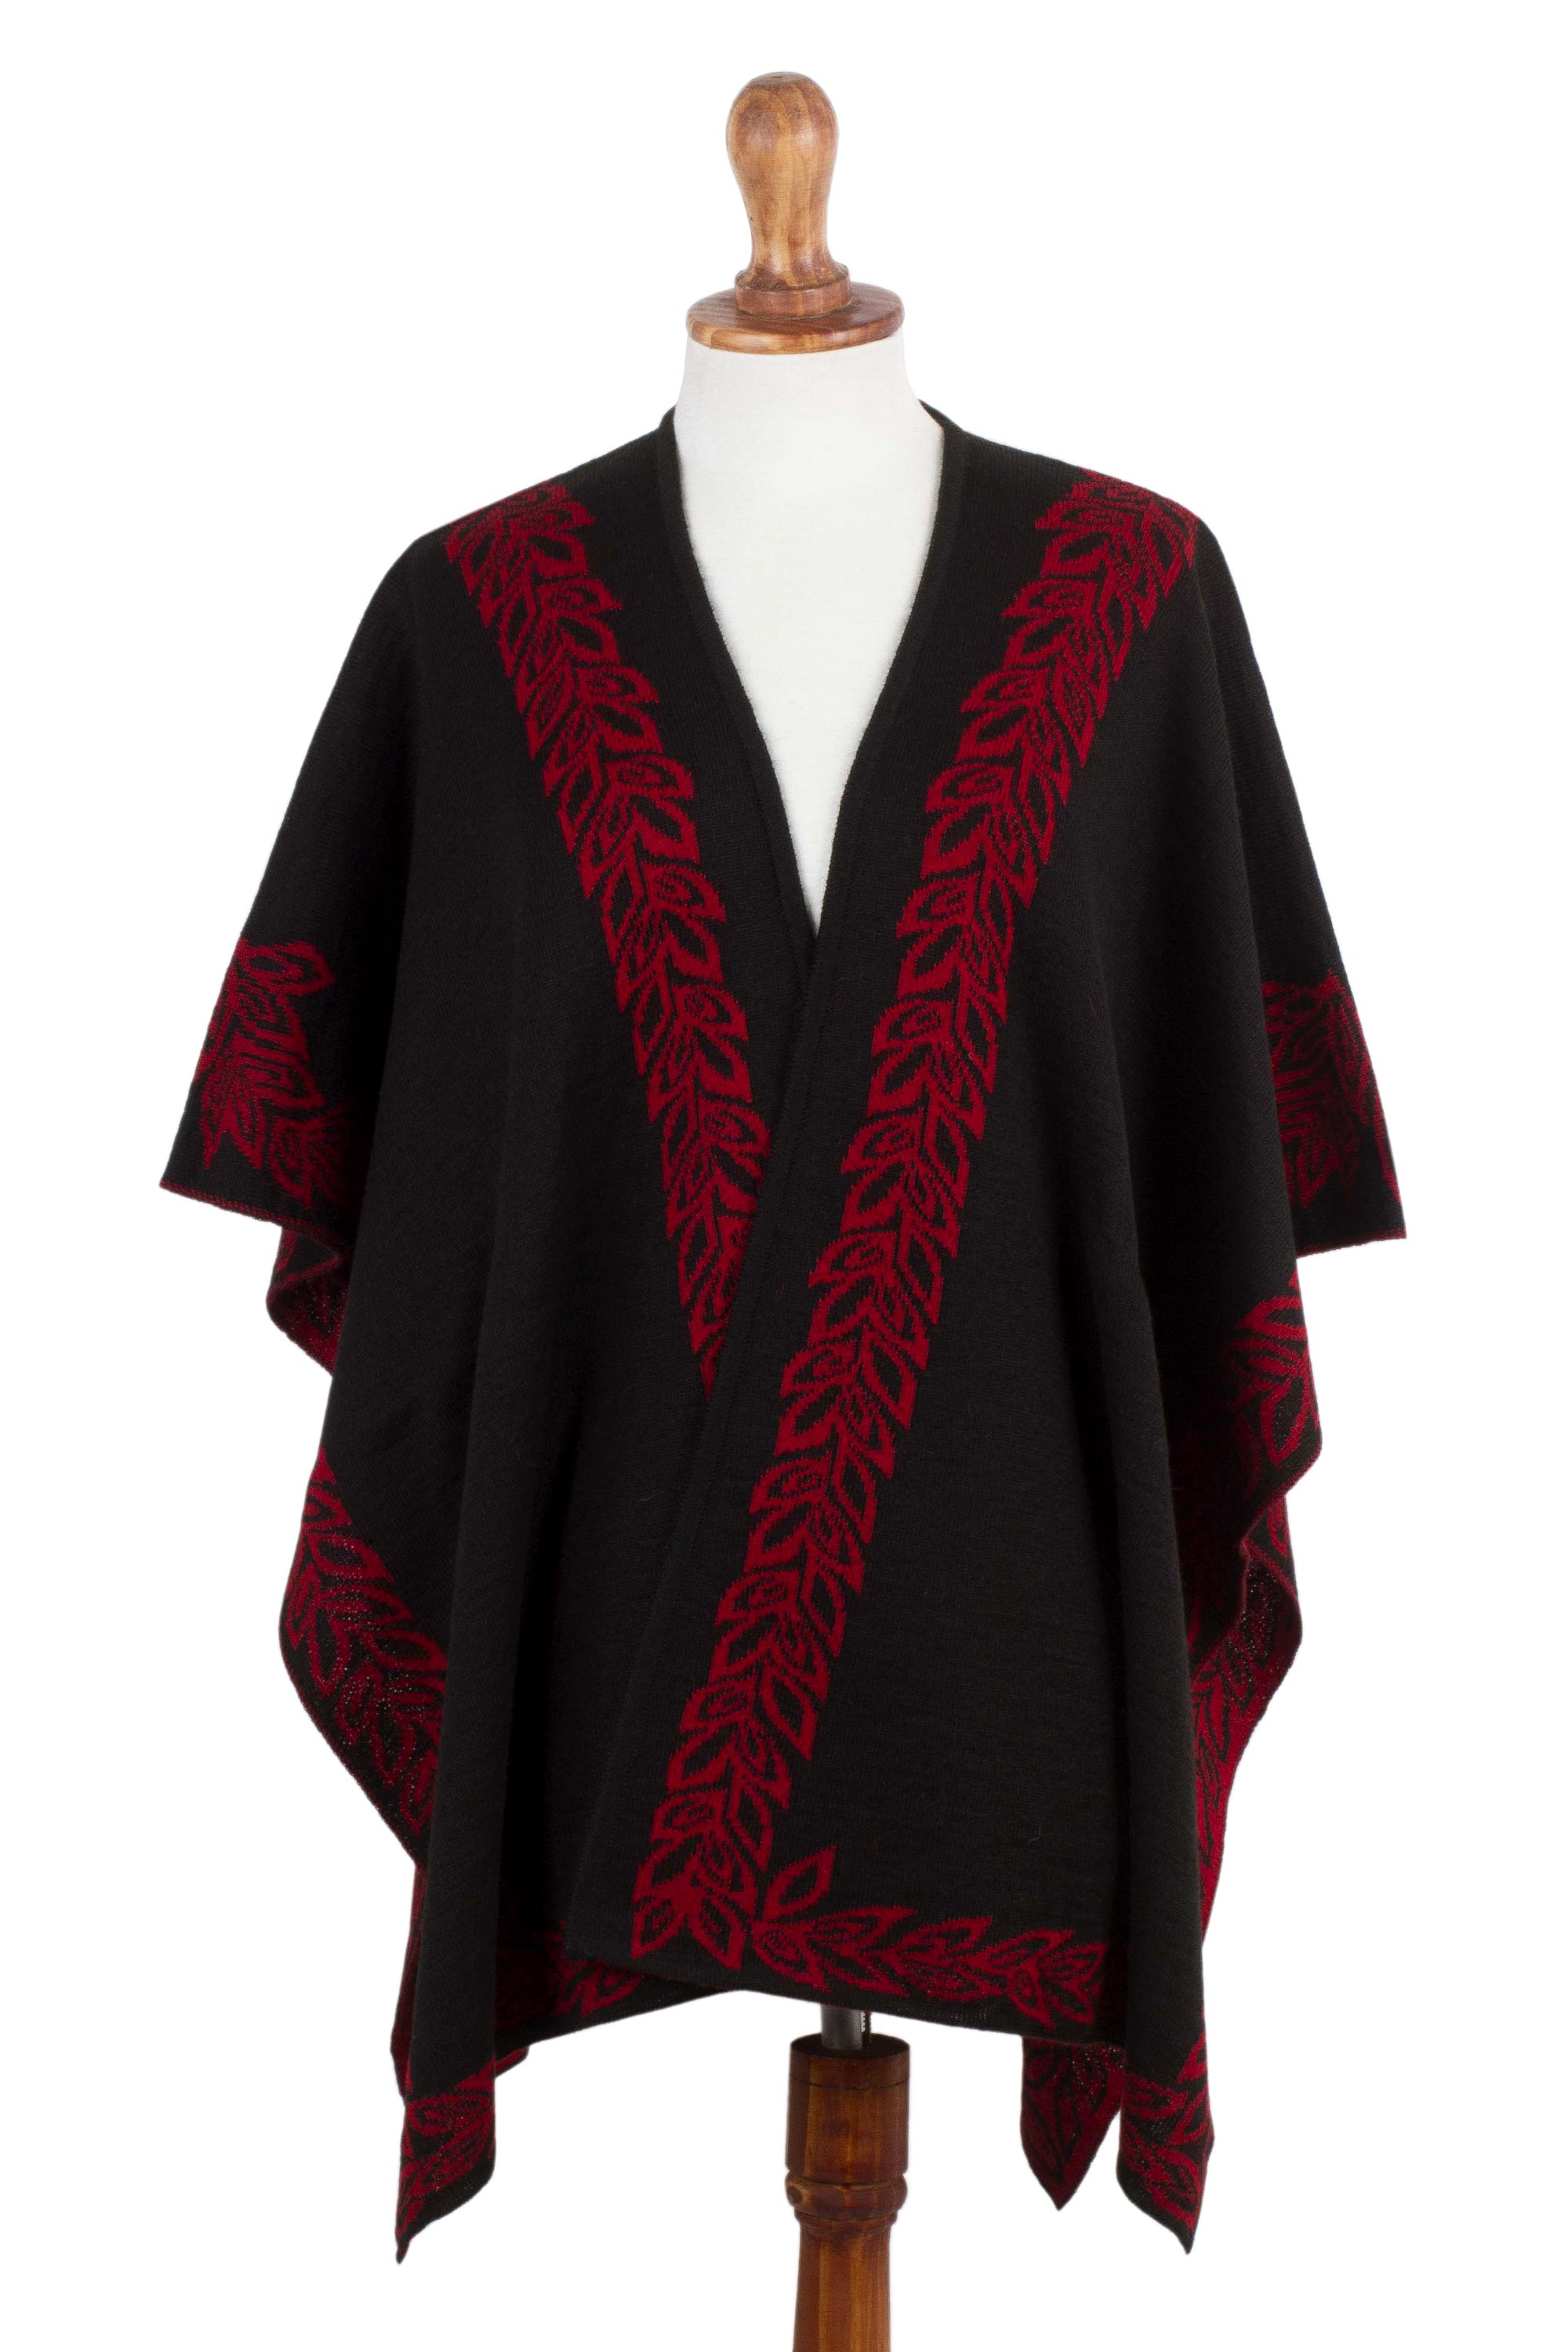 Black and Red Reversible Alpaca Blend Ruana from Peru - Rose Attraction ...